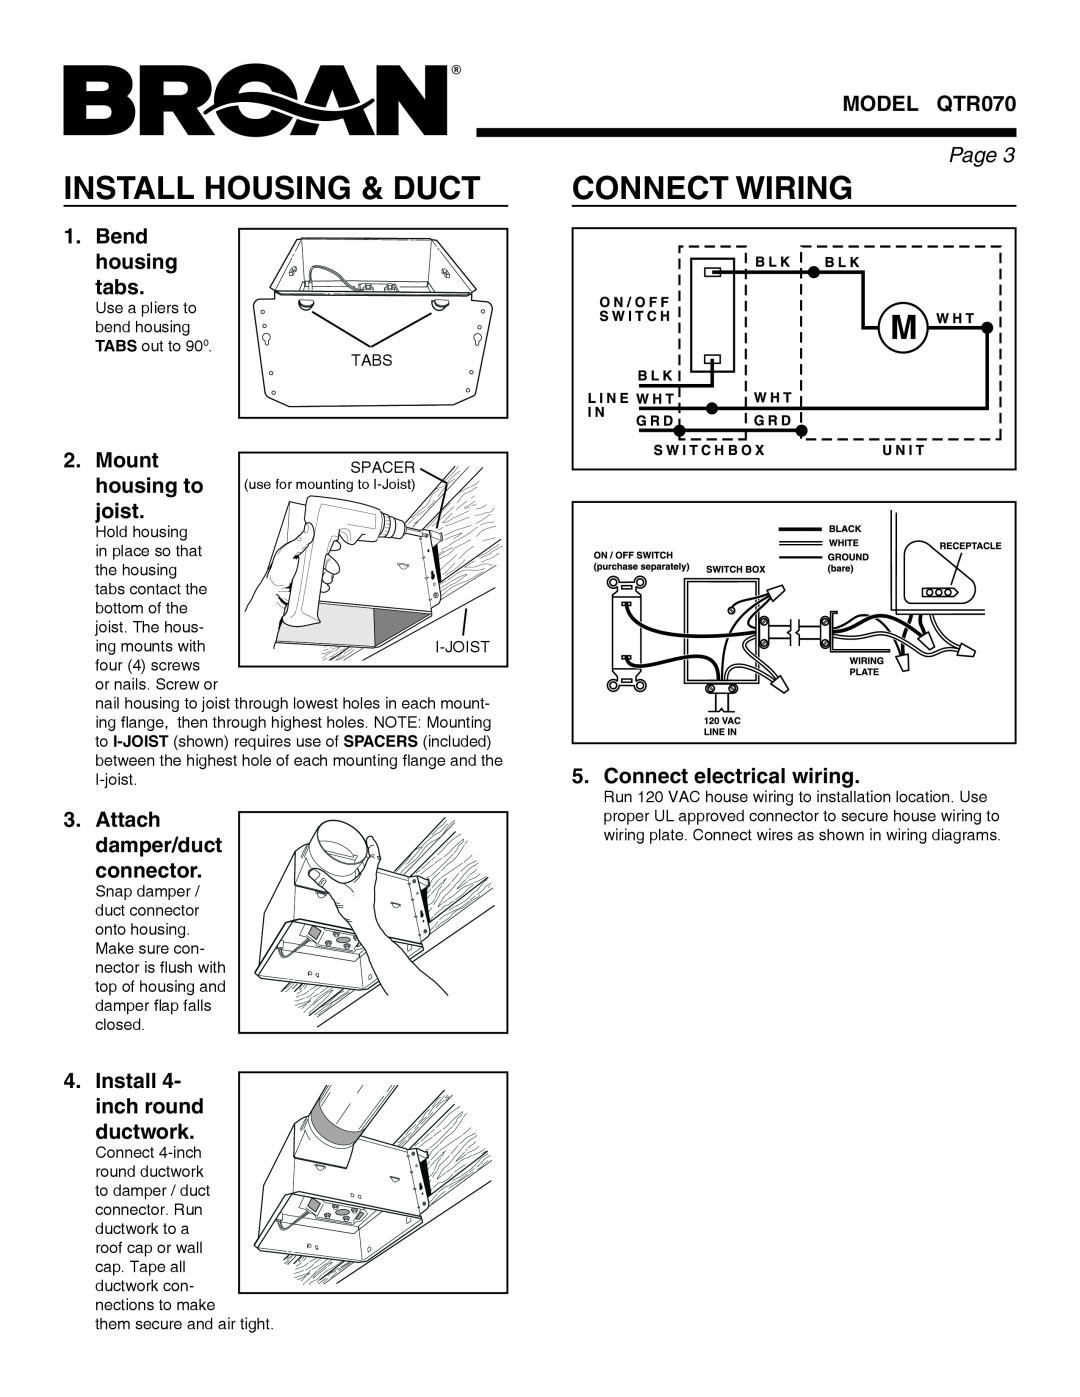 Broan QTR070 Install Housing & Duct, Connect Wiring, Bend, tabs, Mount, housing to, joist, Connect electrical wiring 